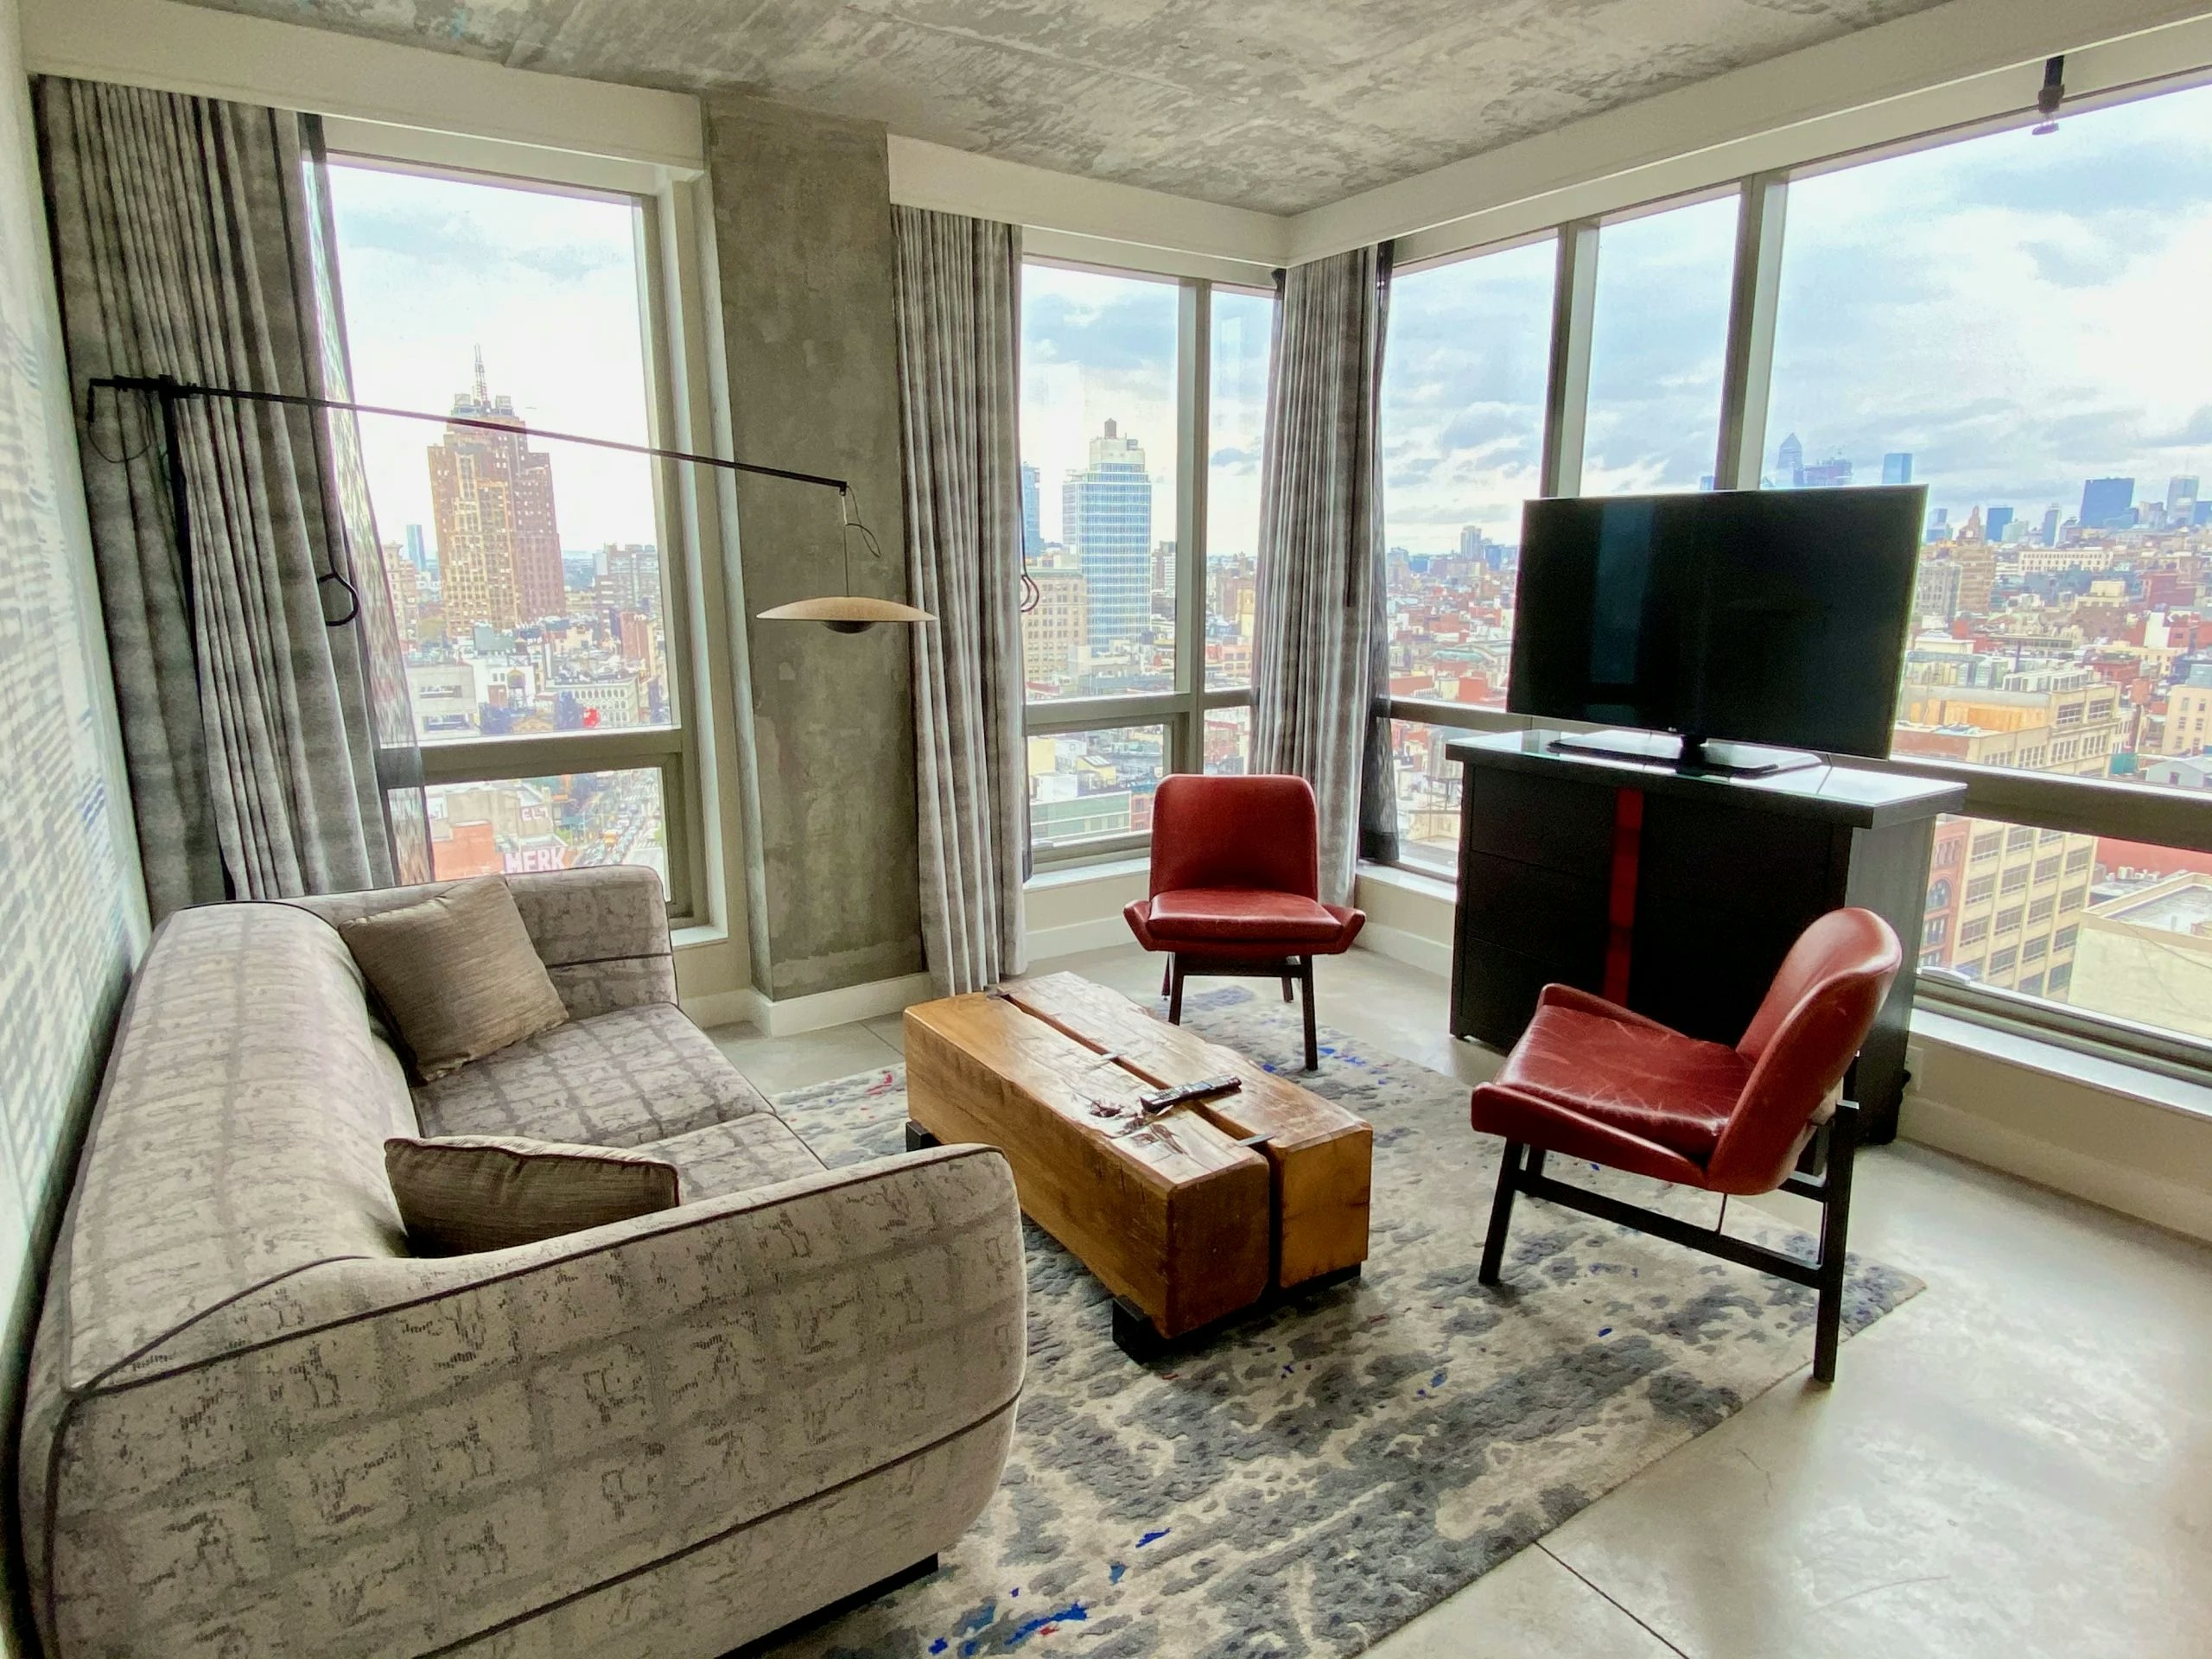 Suite at Hotel 50 Bowery, New York City